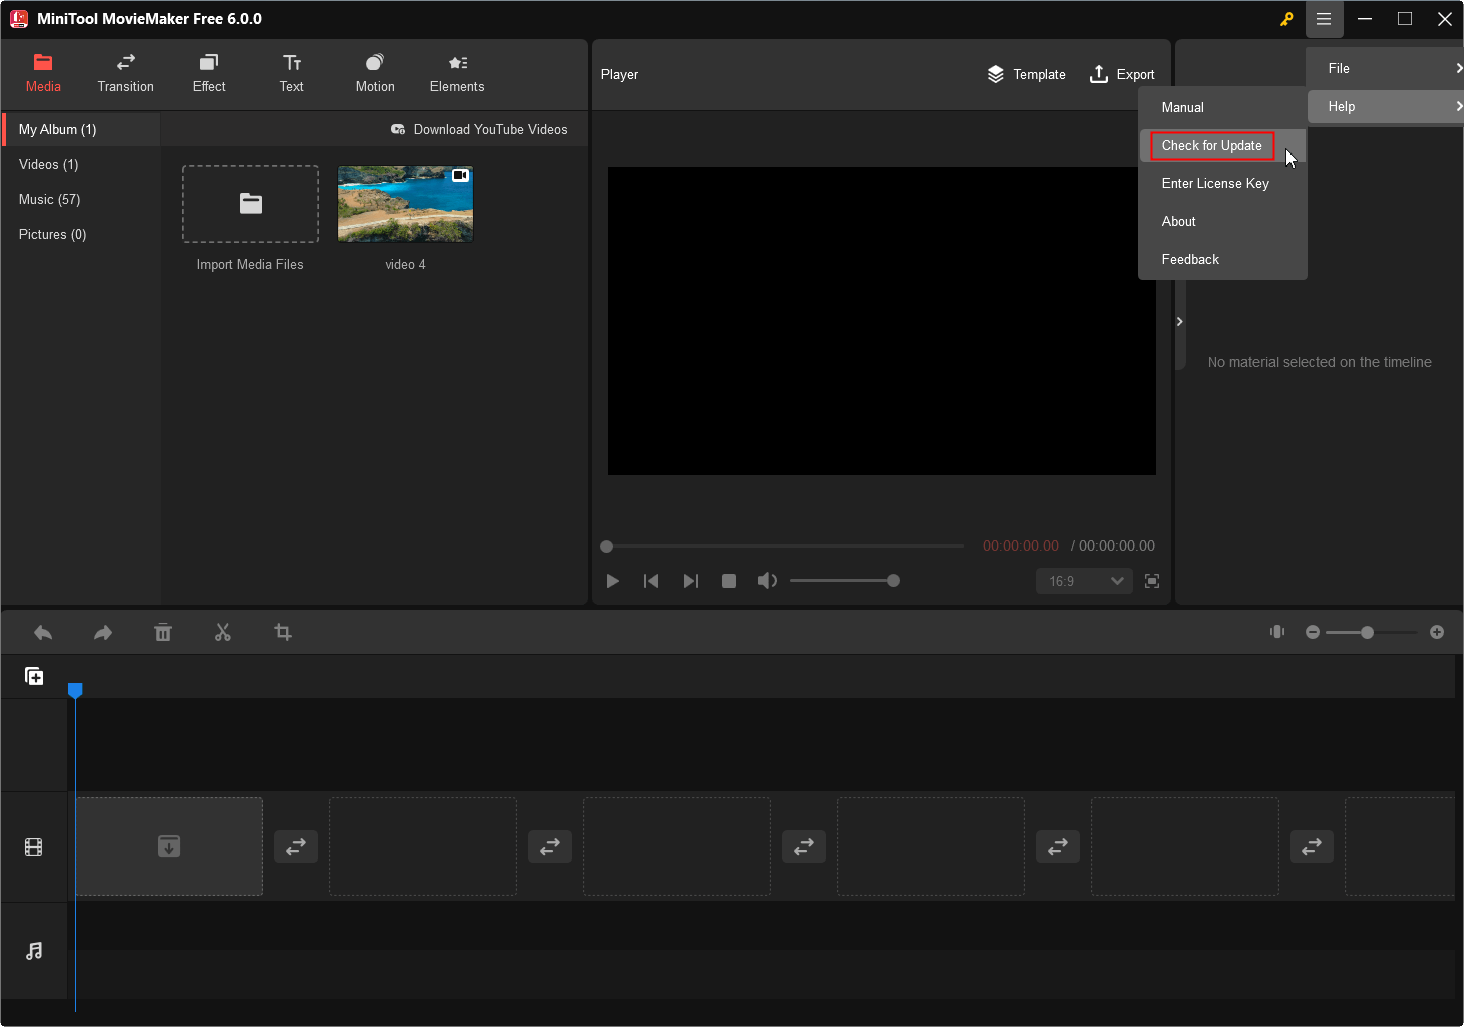 check update for MiniTool MovieMaker